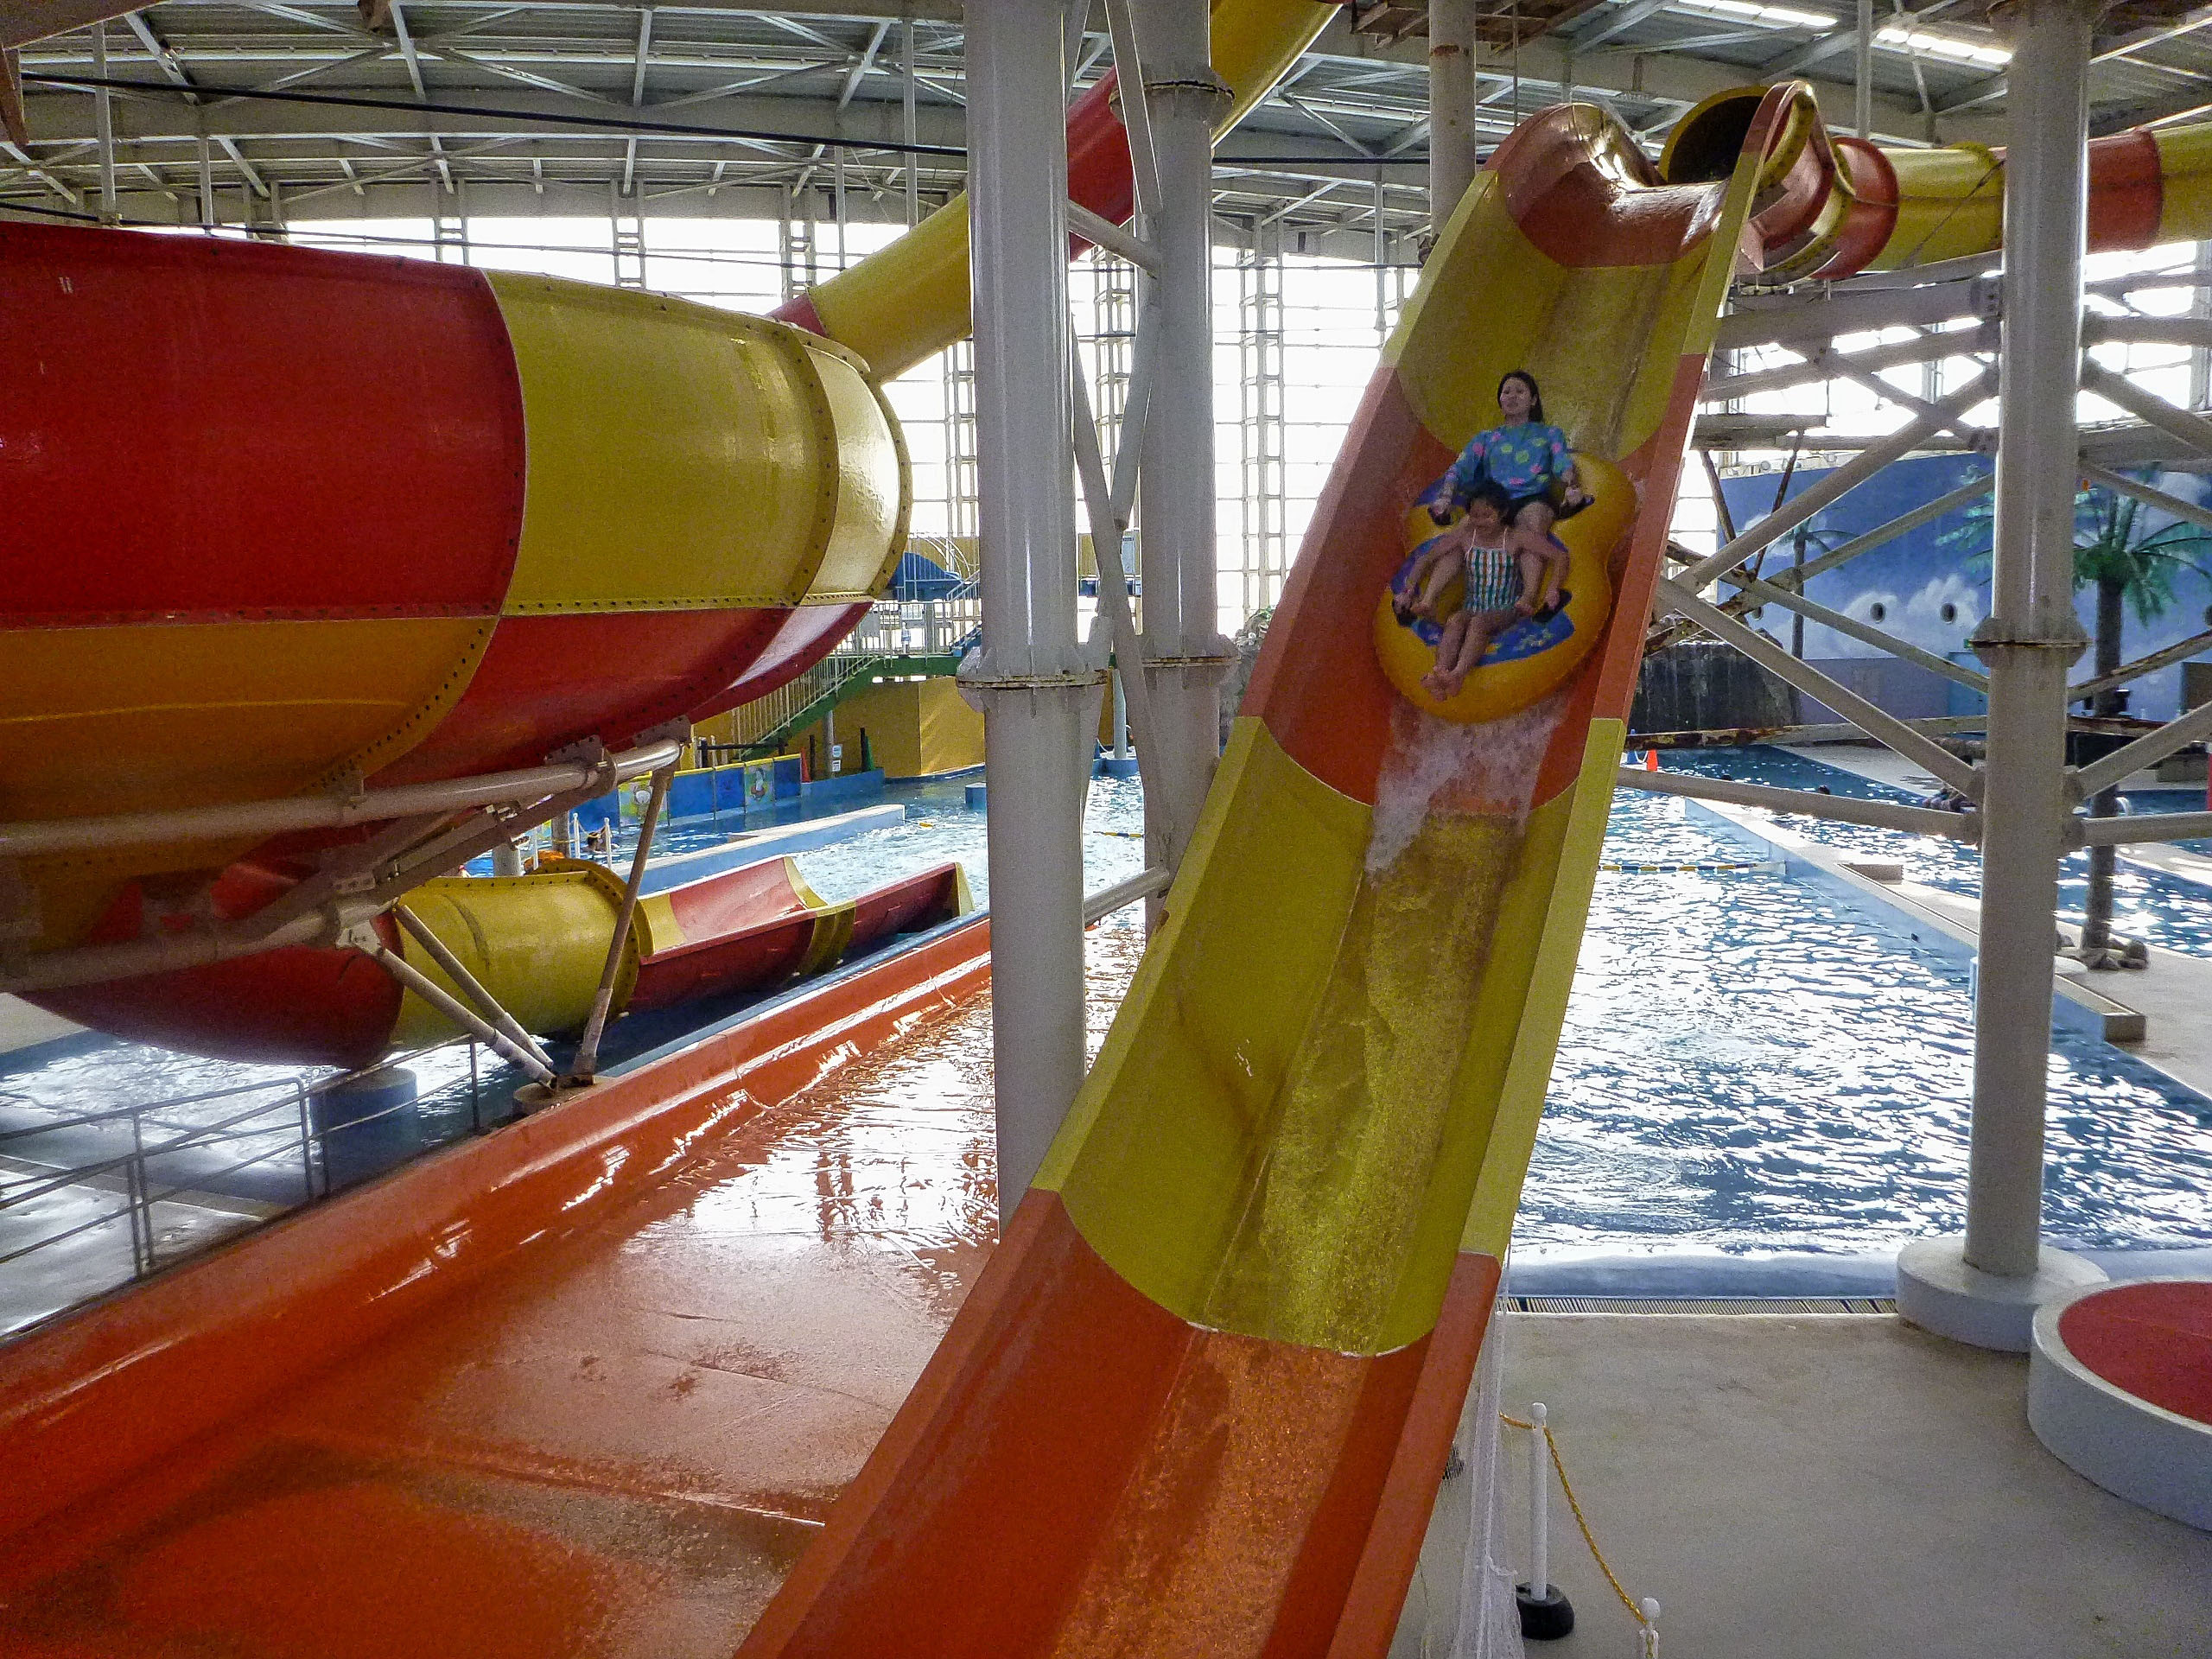 Wet and wild: Spa World in Osaka is a family-friendly mix of children's water park and hot-spring retreat. Water slides and other play equipment are available for kids of all ages, and there is even accommodation for when one day is not enough. | JASON JENKINS